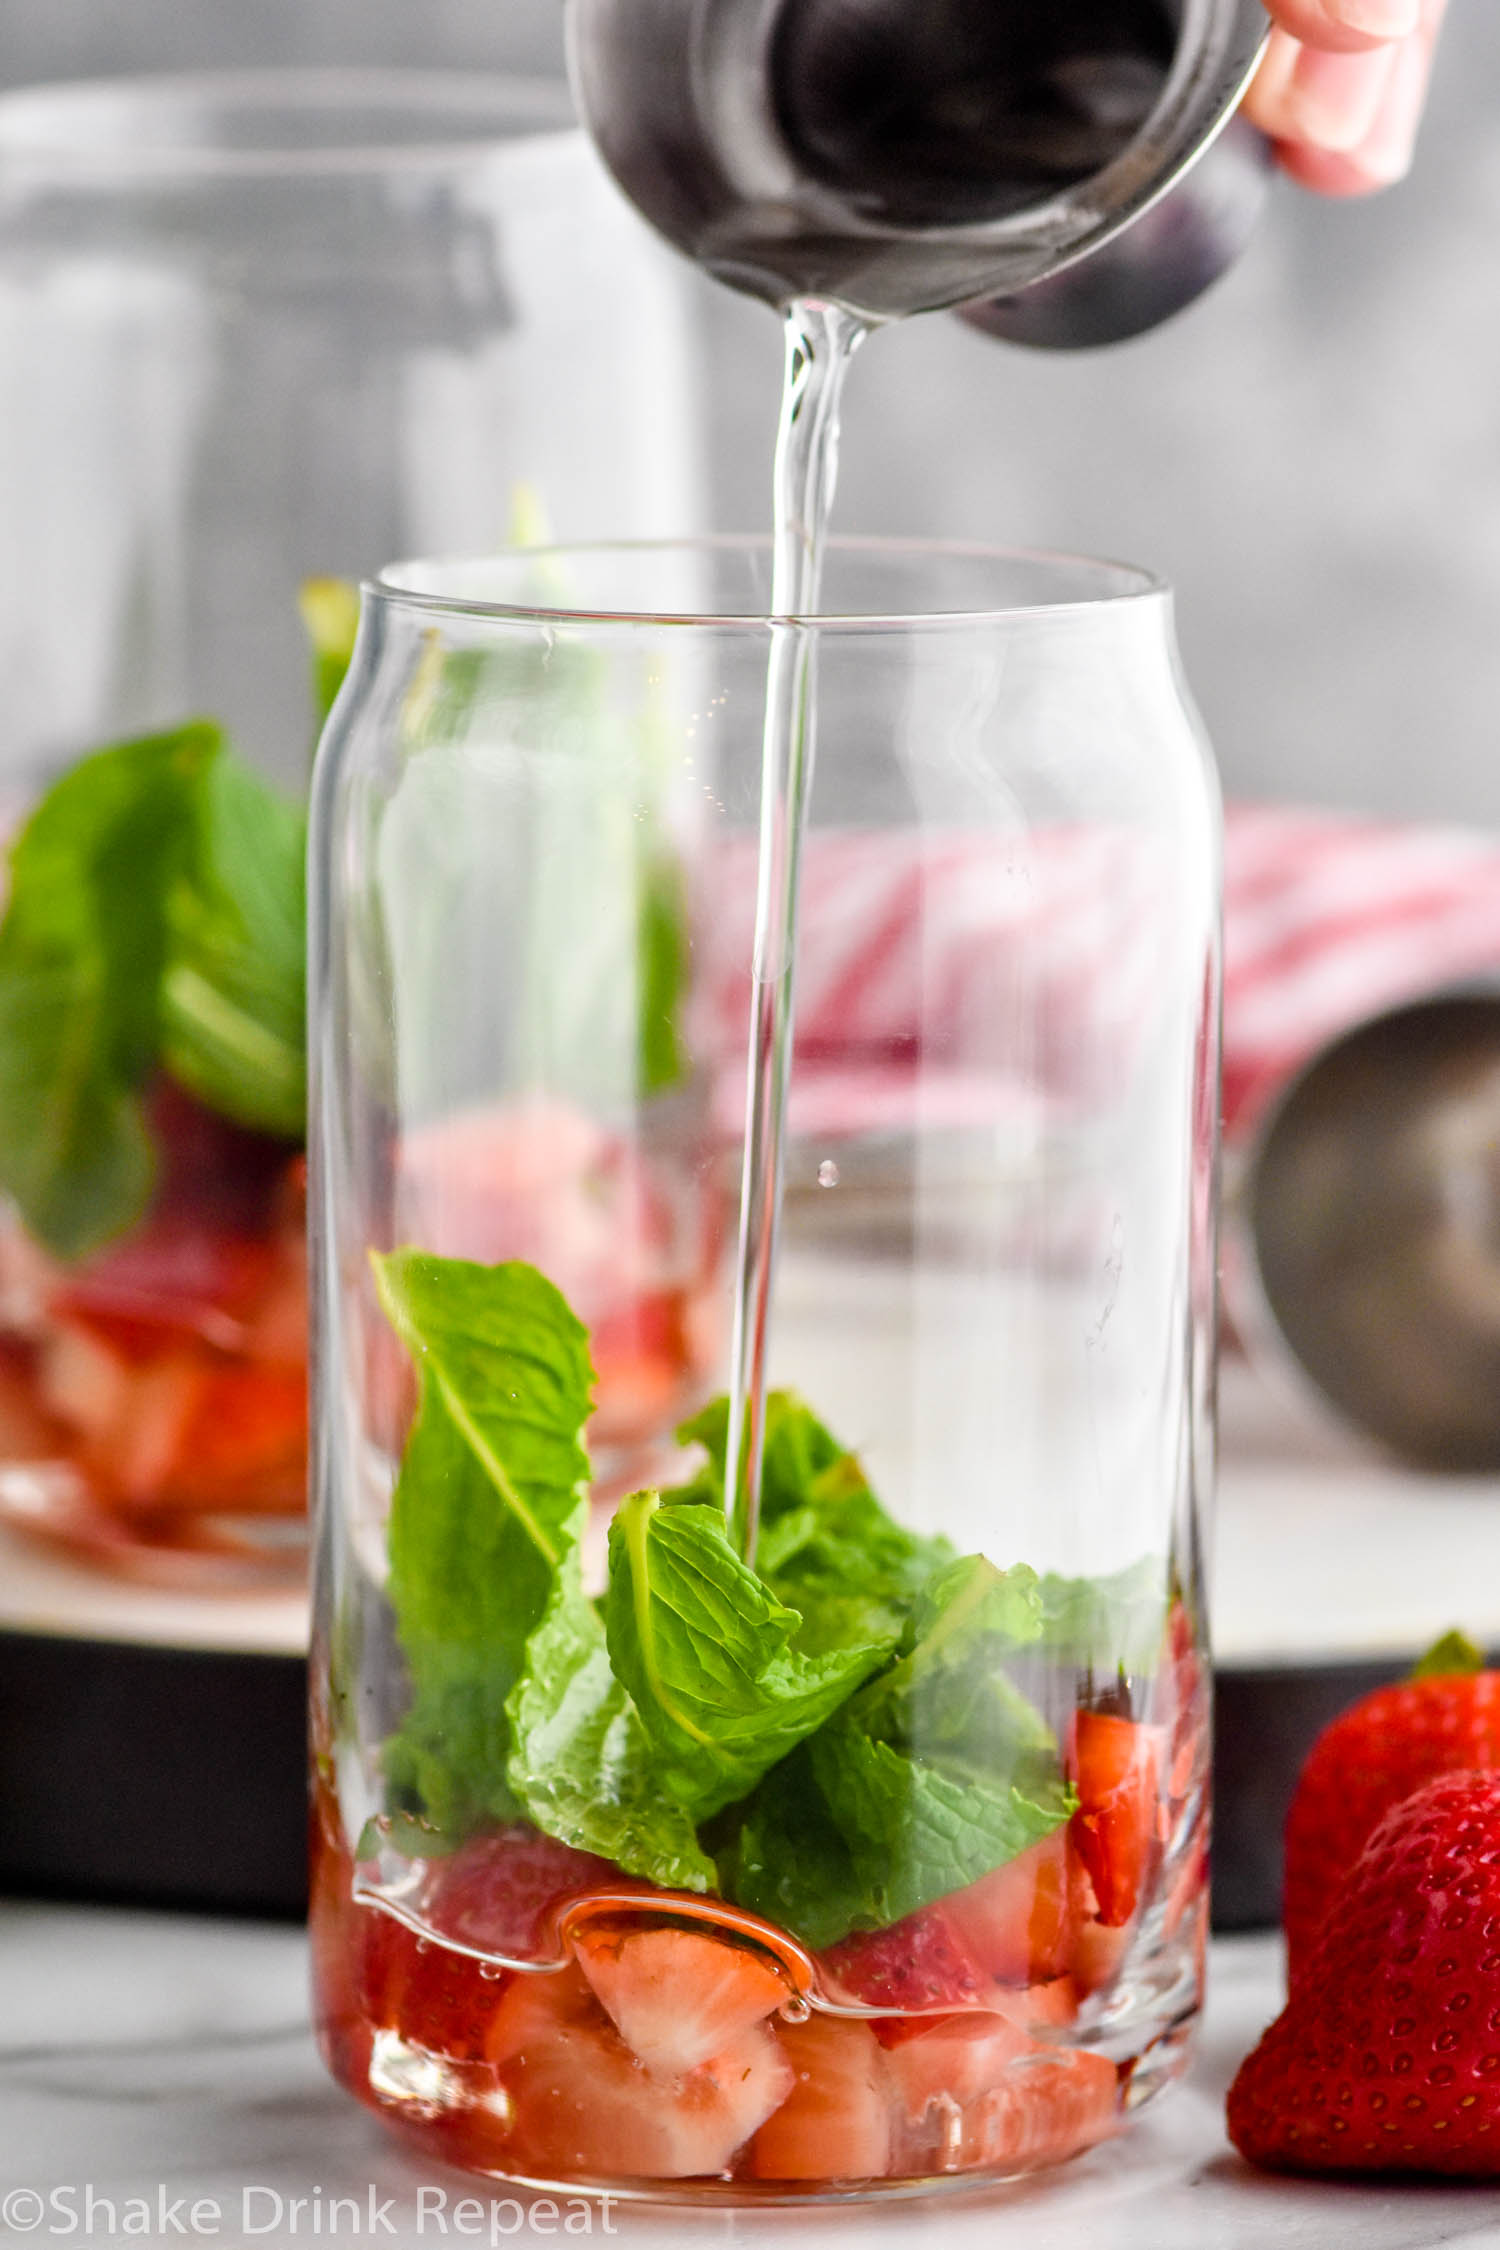 Side view of person's hand pouring simple syrup into glass of ingredients for Strawberry Mojito recipe. Another glass of ingredients in the background. Strawberries beside glasses.